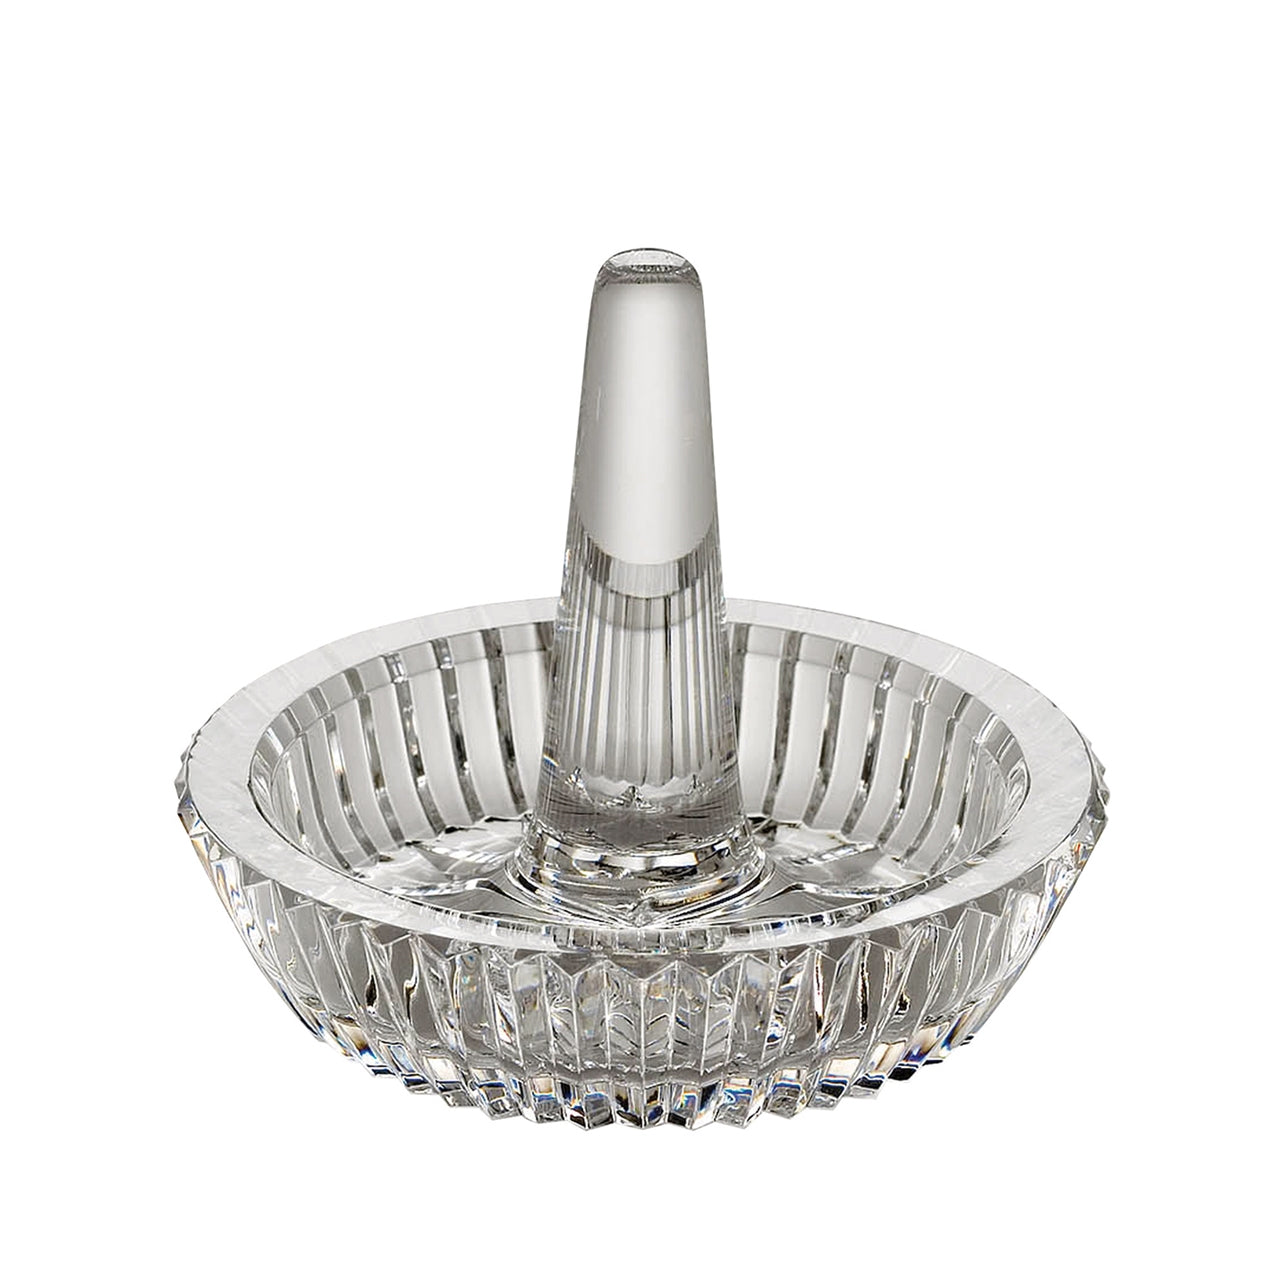 Waterford Crystal Heritage Ring Holder   Keep your engagement, wedding and decorative rings safe on this stunning crystal Ring Holder, which features a central spike for holding rings, and a round, ridged tray for storing necklaces or earrings. An elegant addition to any desk or vanity.